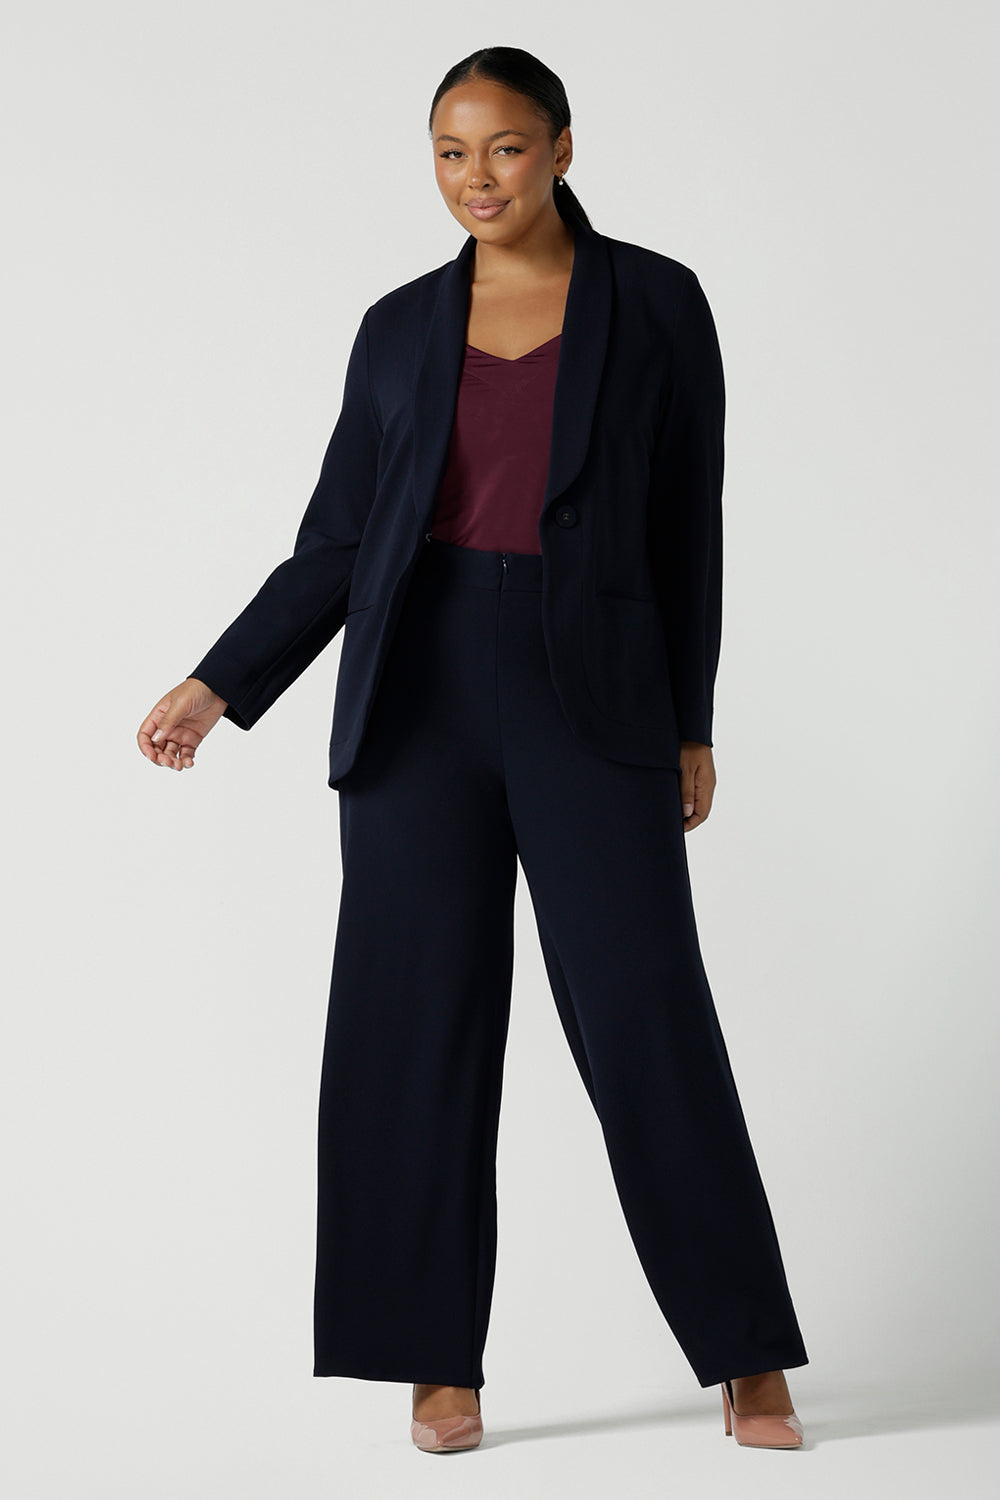 Size 16 women wearing a Navy Marit blazer with Scuba crepe and collar. It has functional patch pockets and tailored shawl collar. Stylish corporate casual wear for women. Made in Australia size 8 - 24.